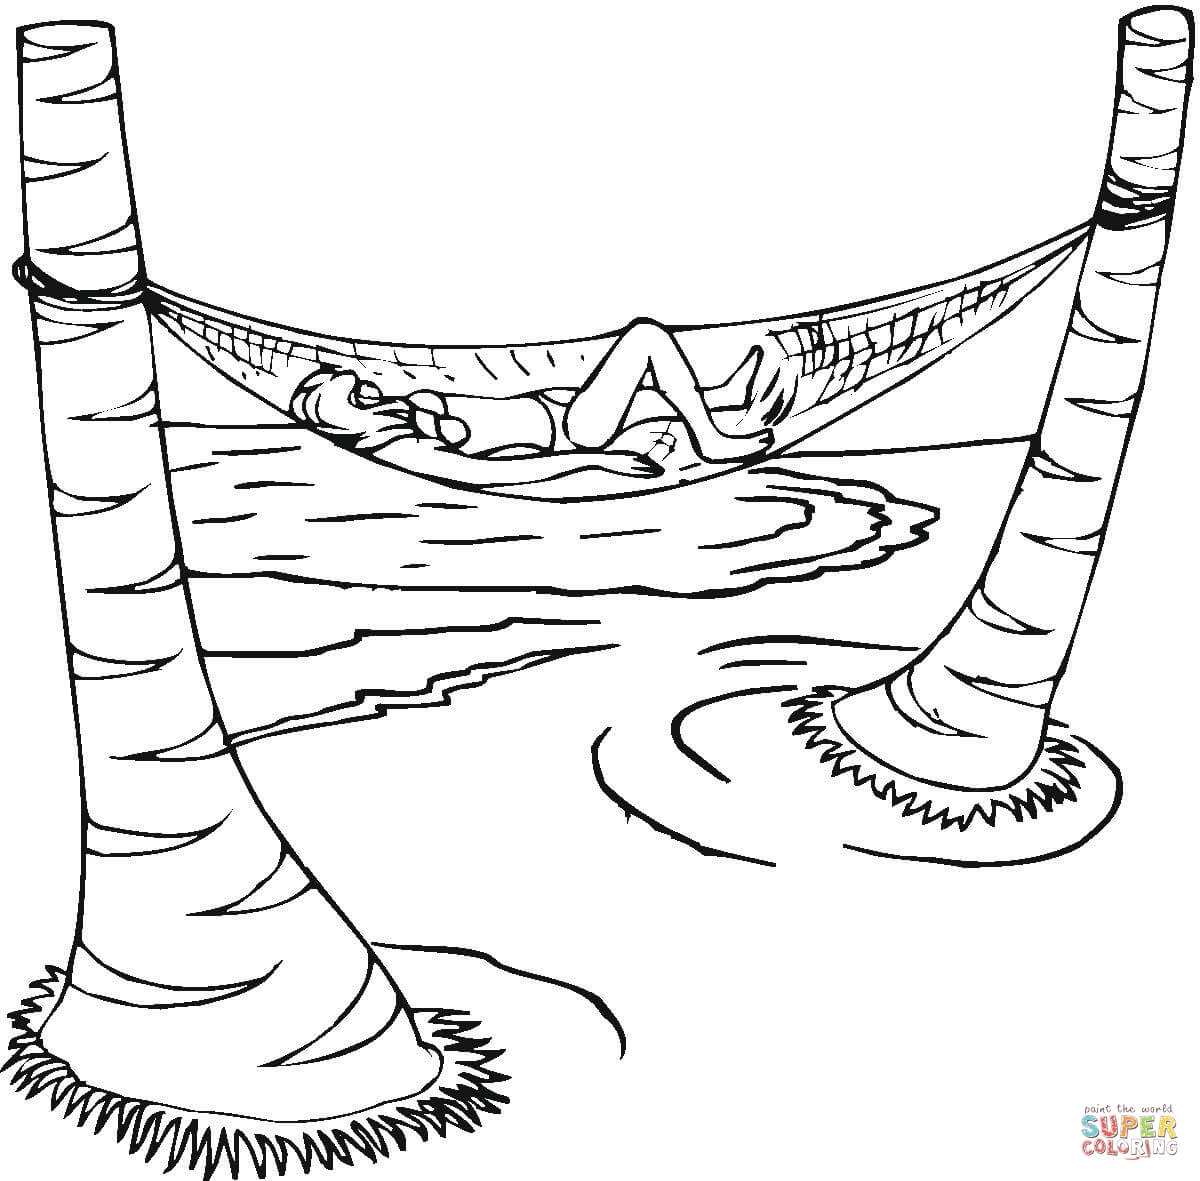 Summer vacation in a hammock coloring page free printable coloring pages